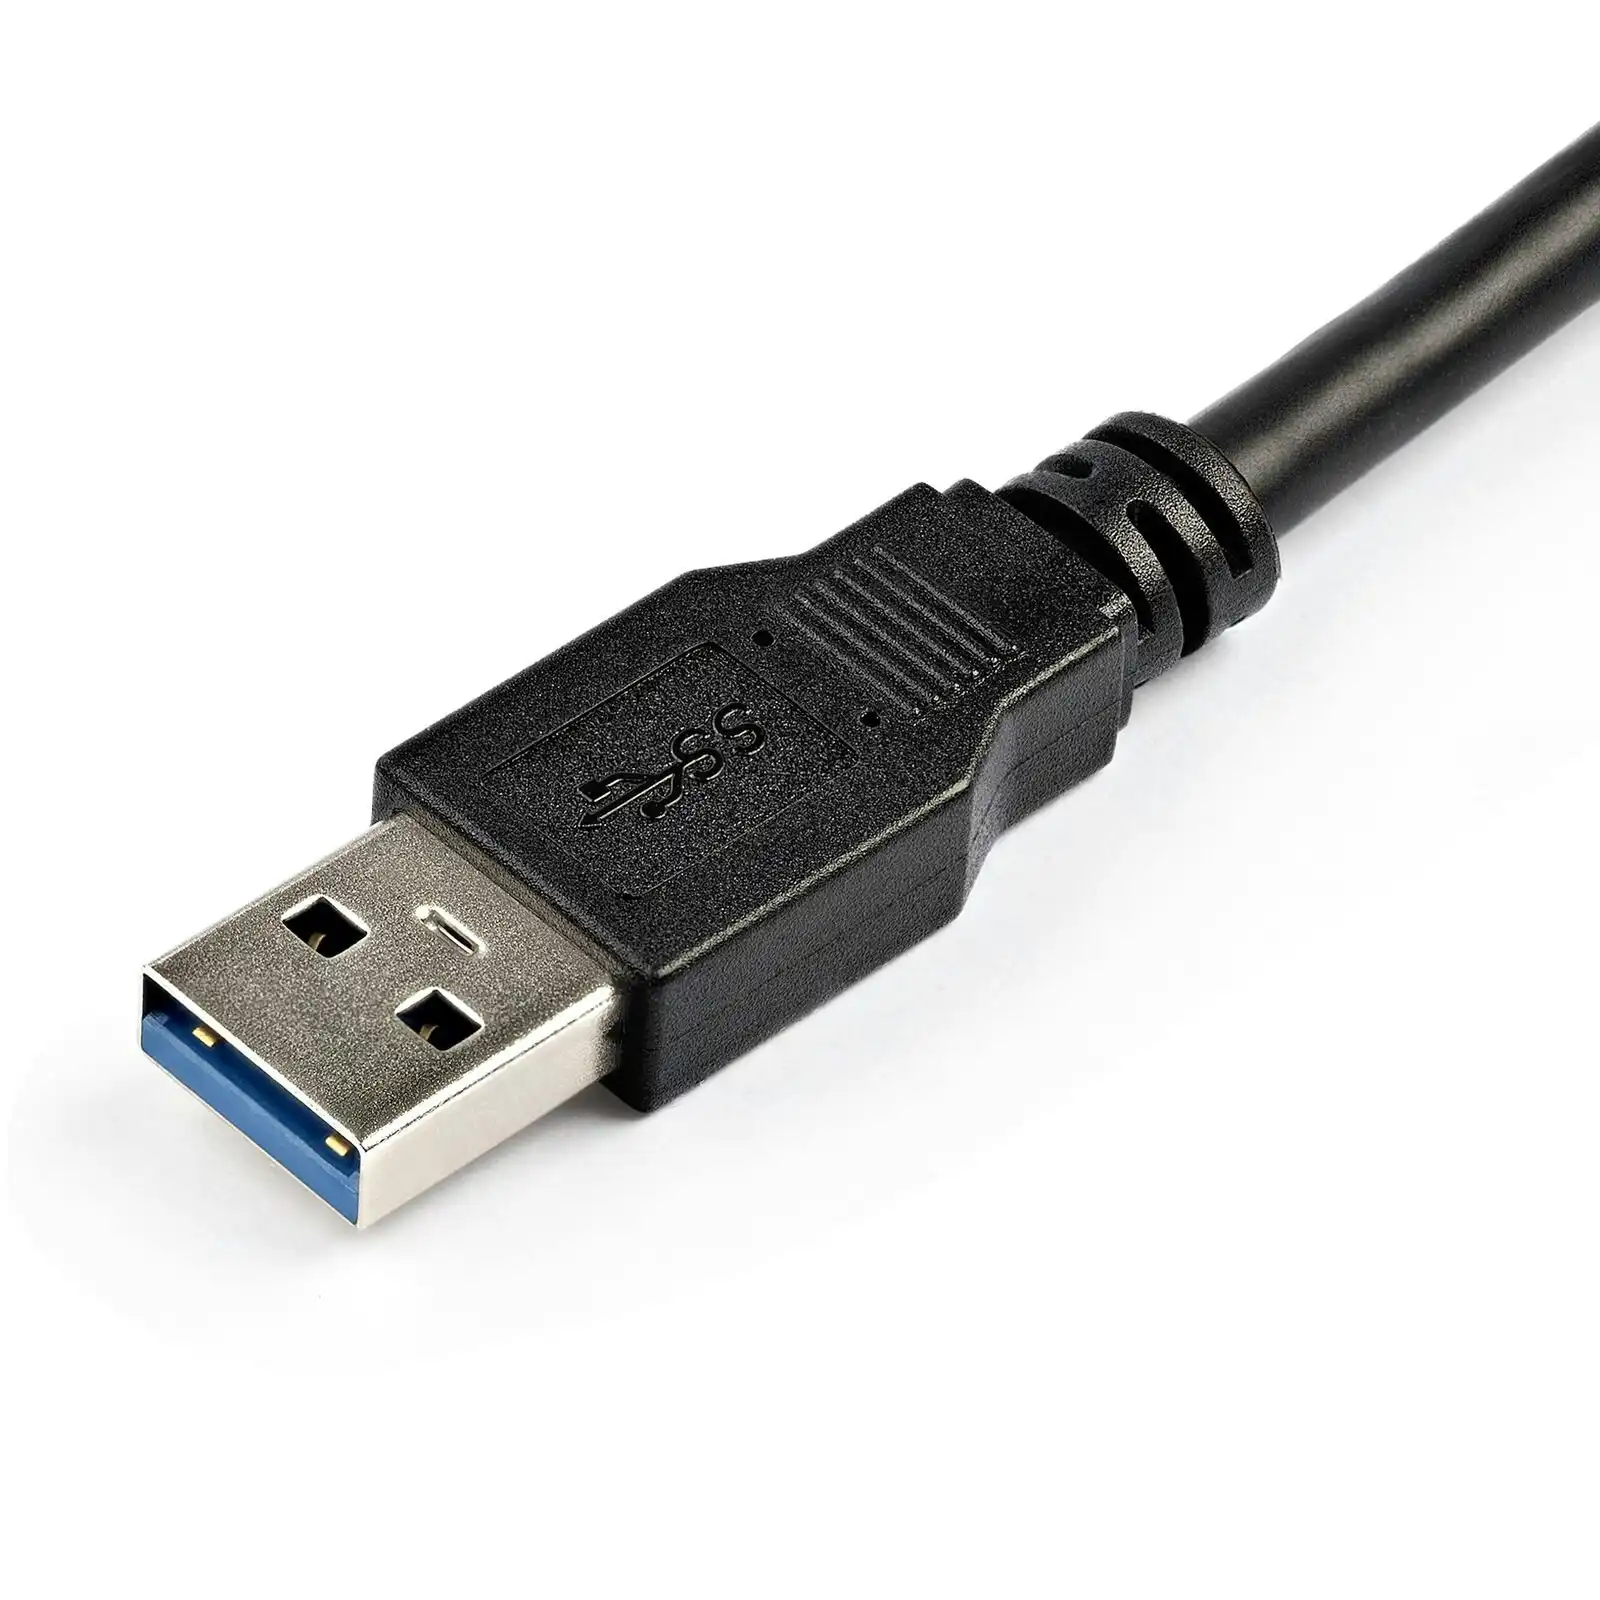 Star Tech 2m SuperSpeed USB 3.0 5Gbps Extension Cable Male To Female Black